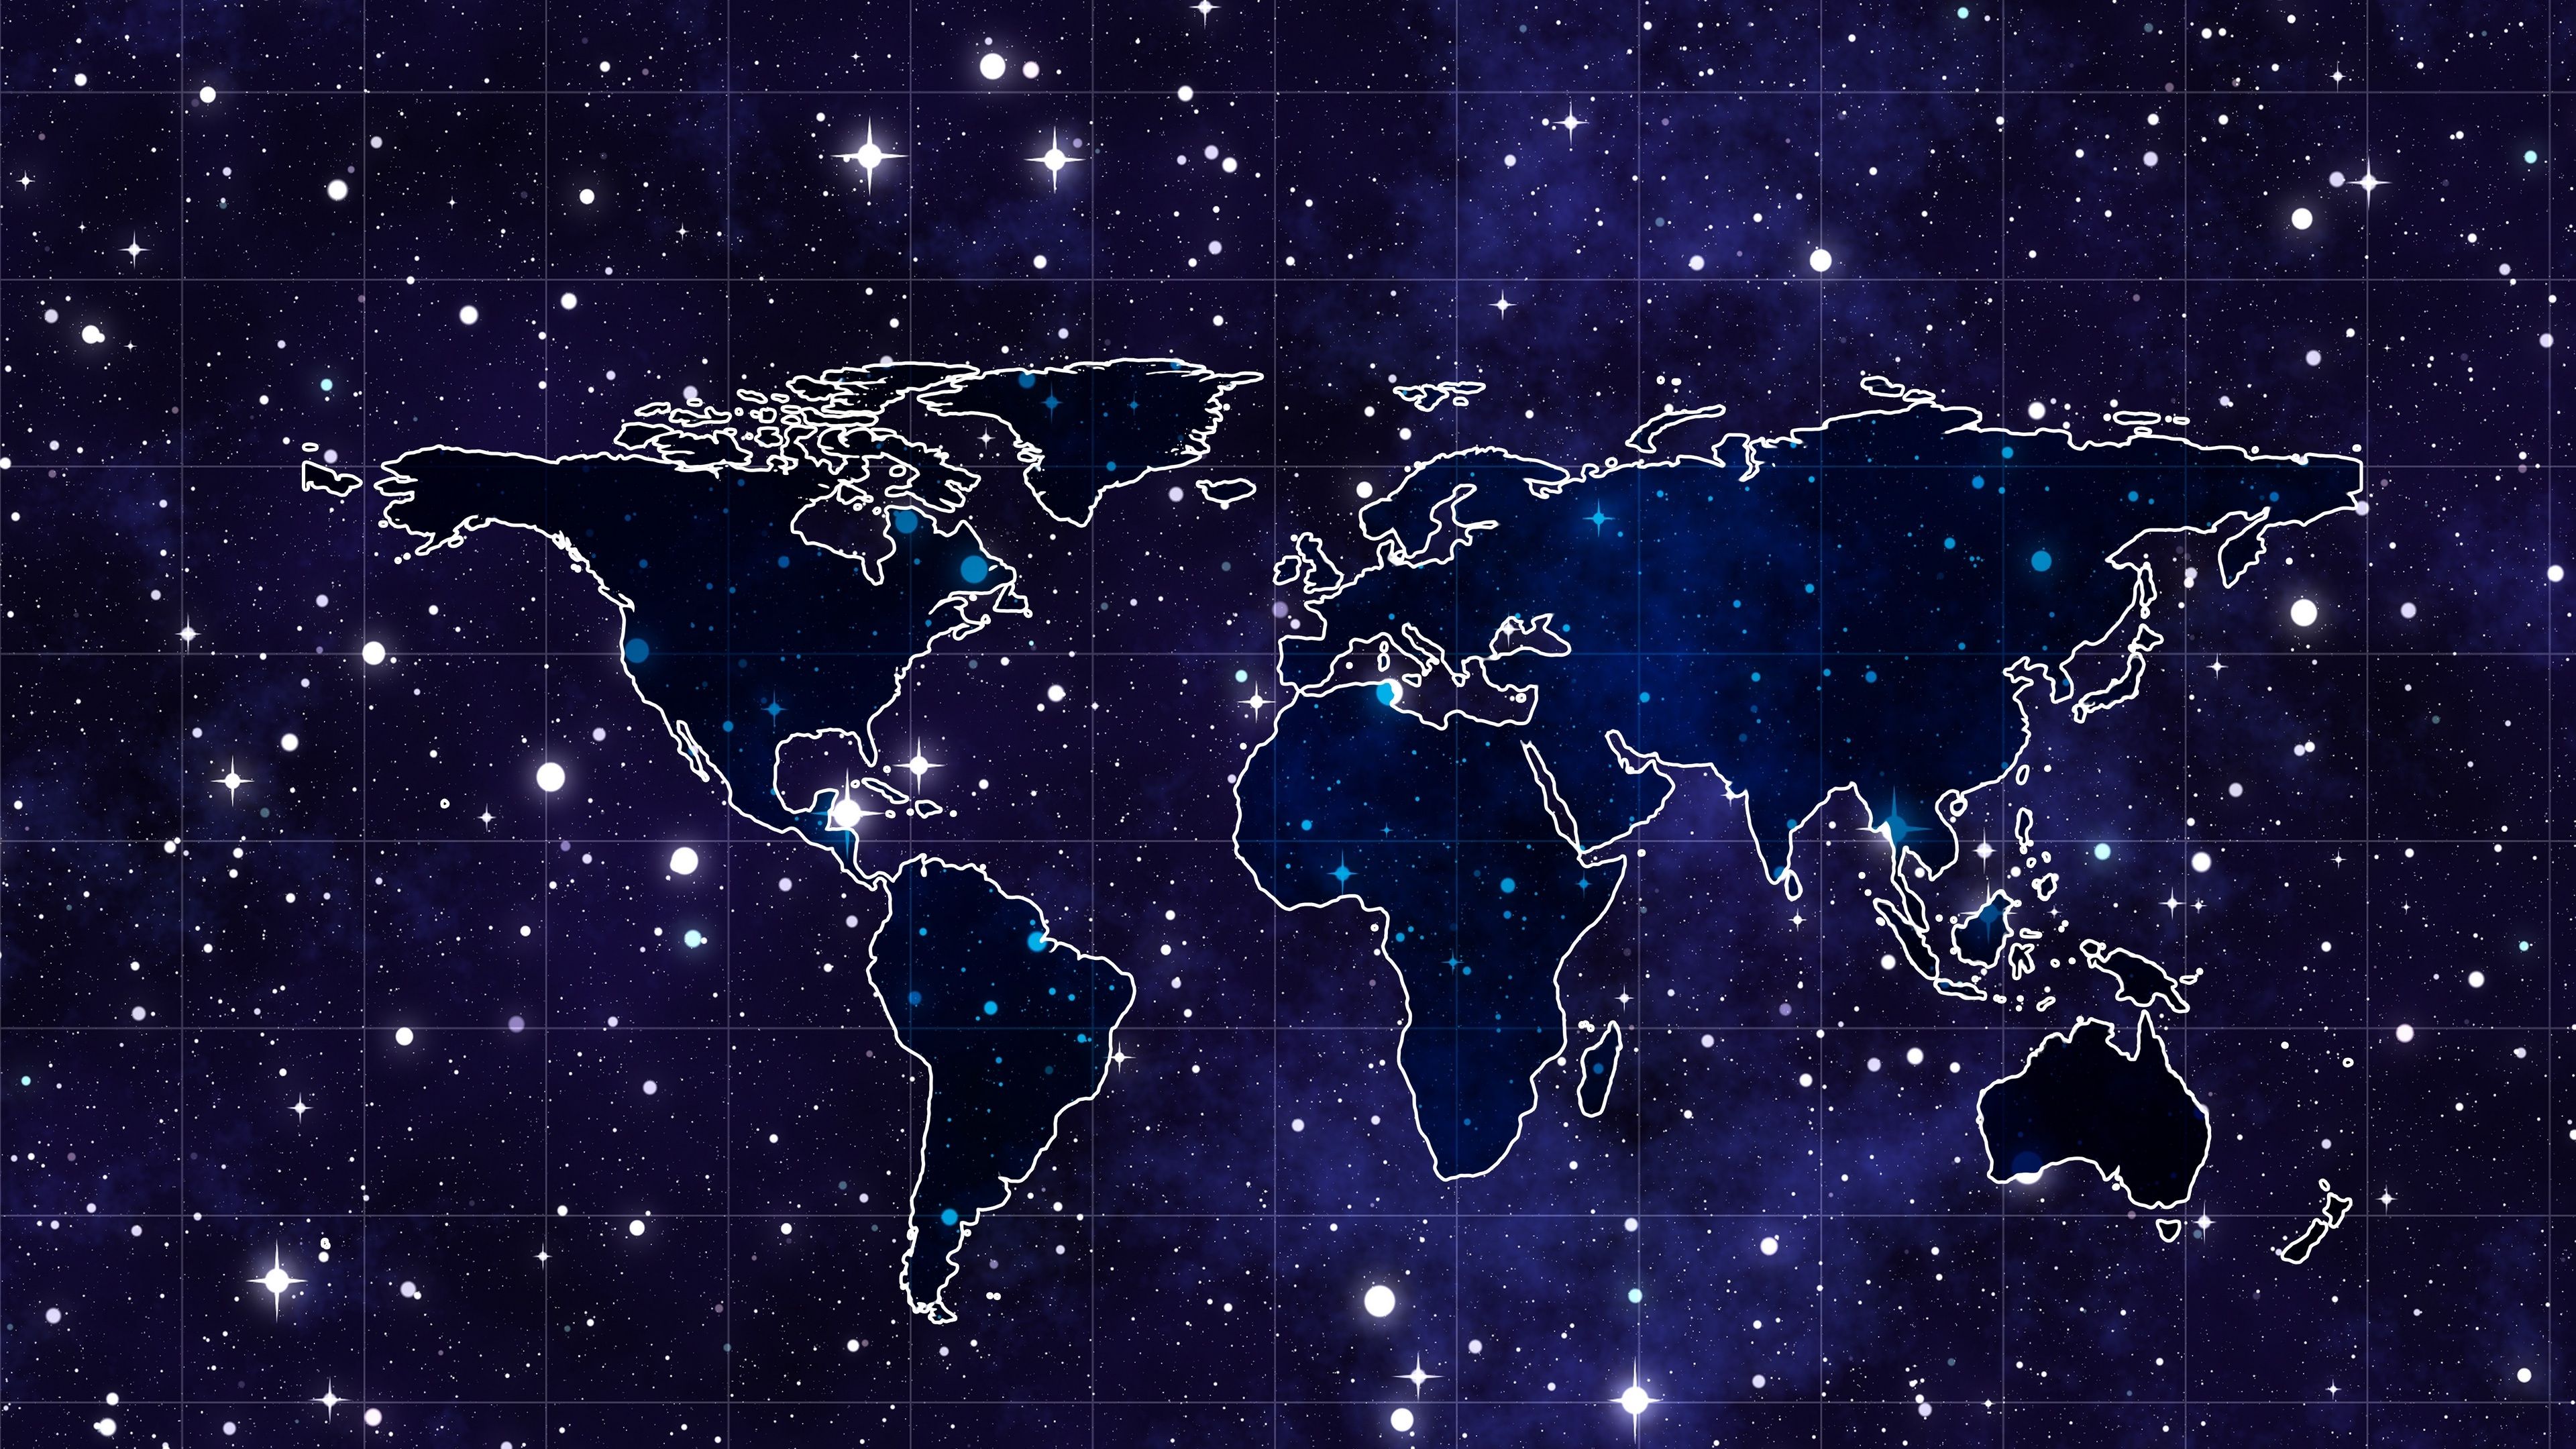 Wallpaper 4k space, continents, map 4k continents, Map, Space